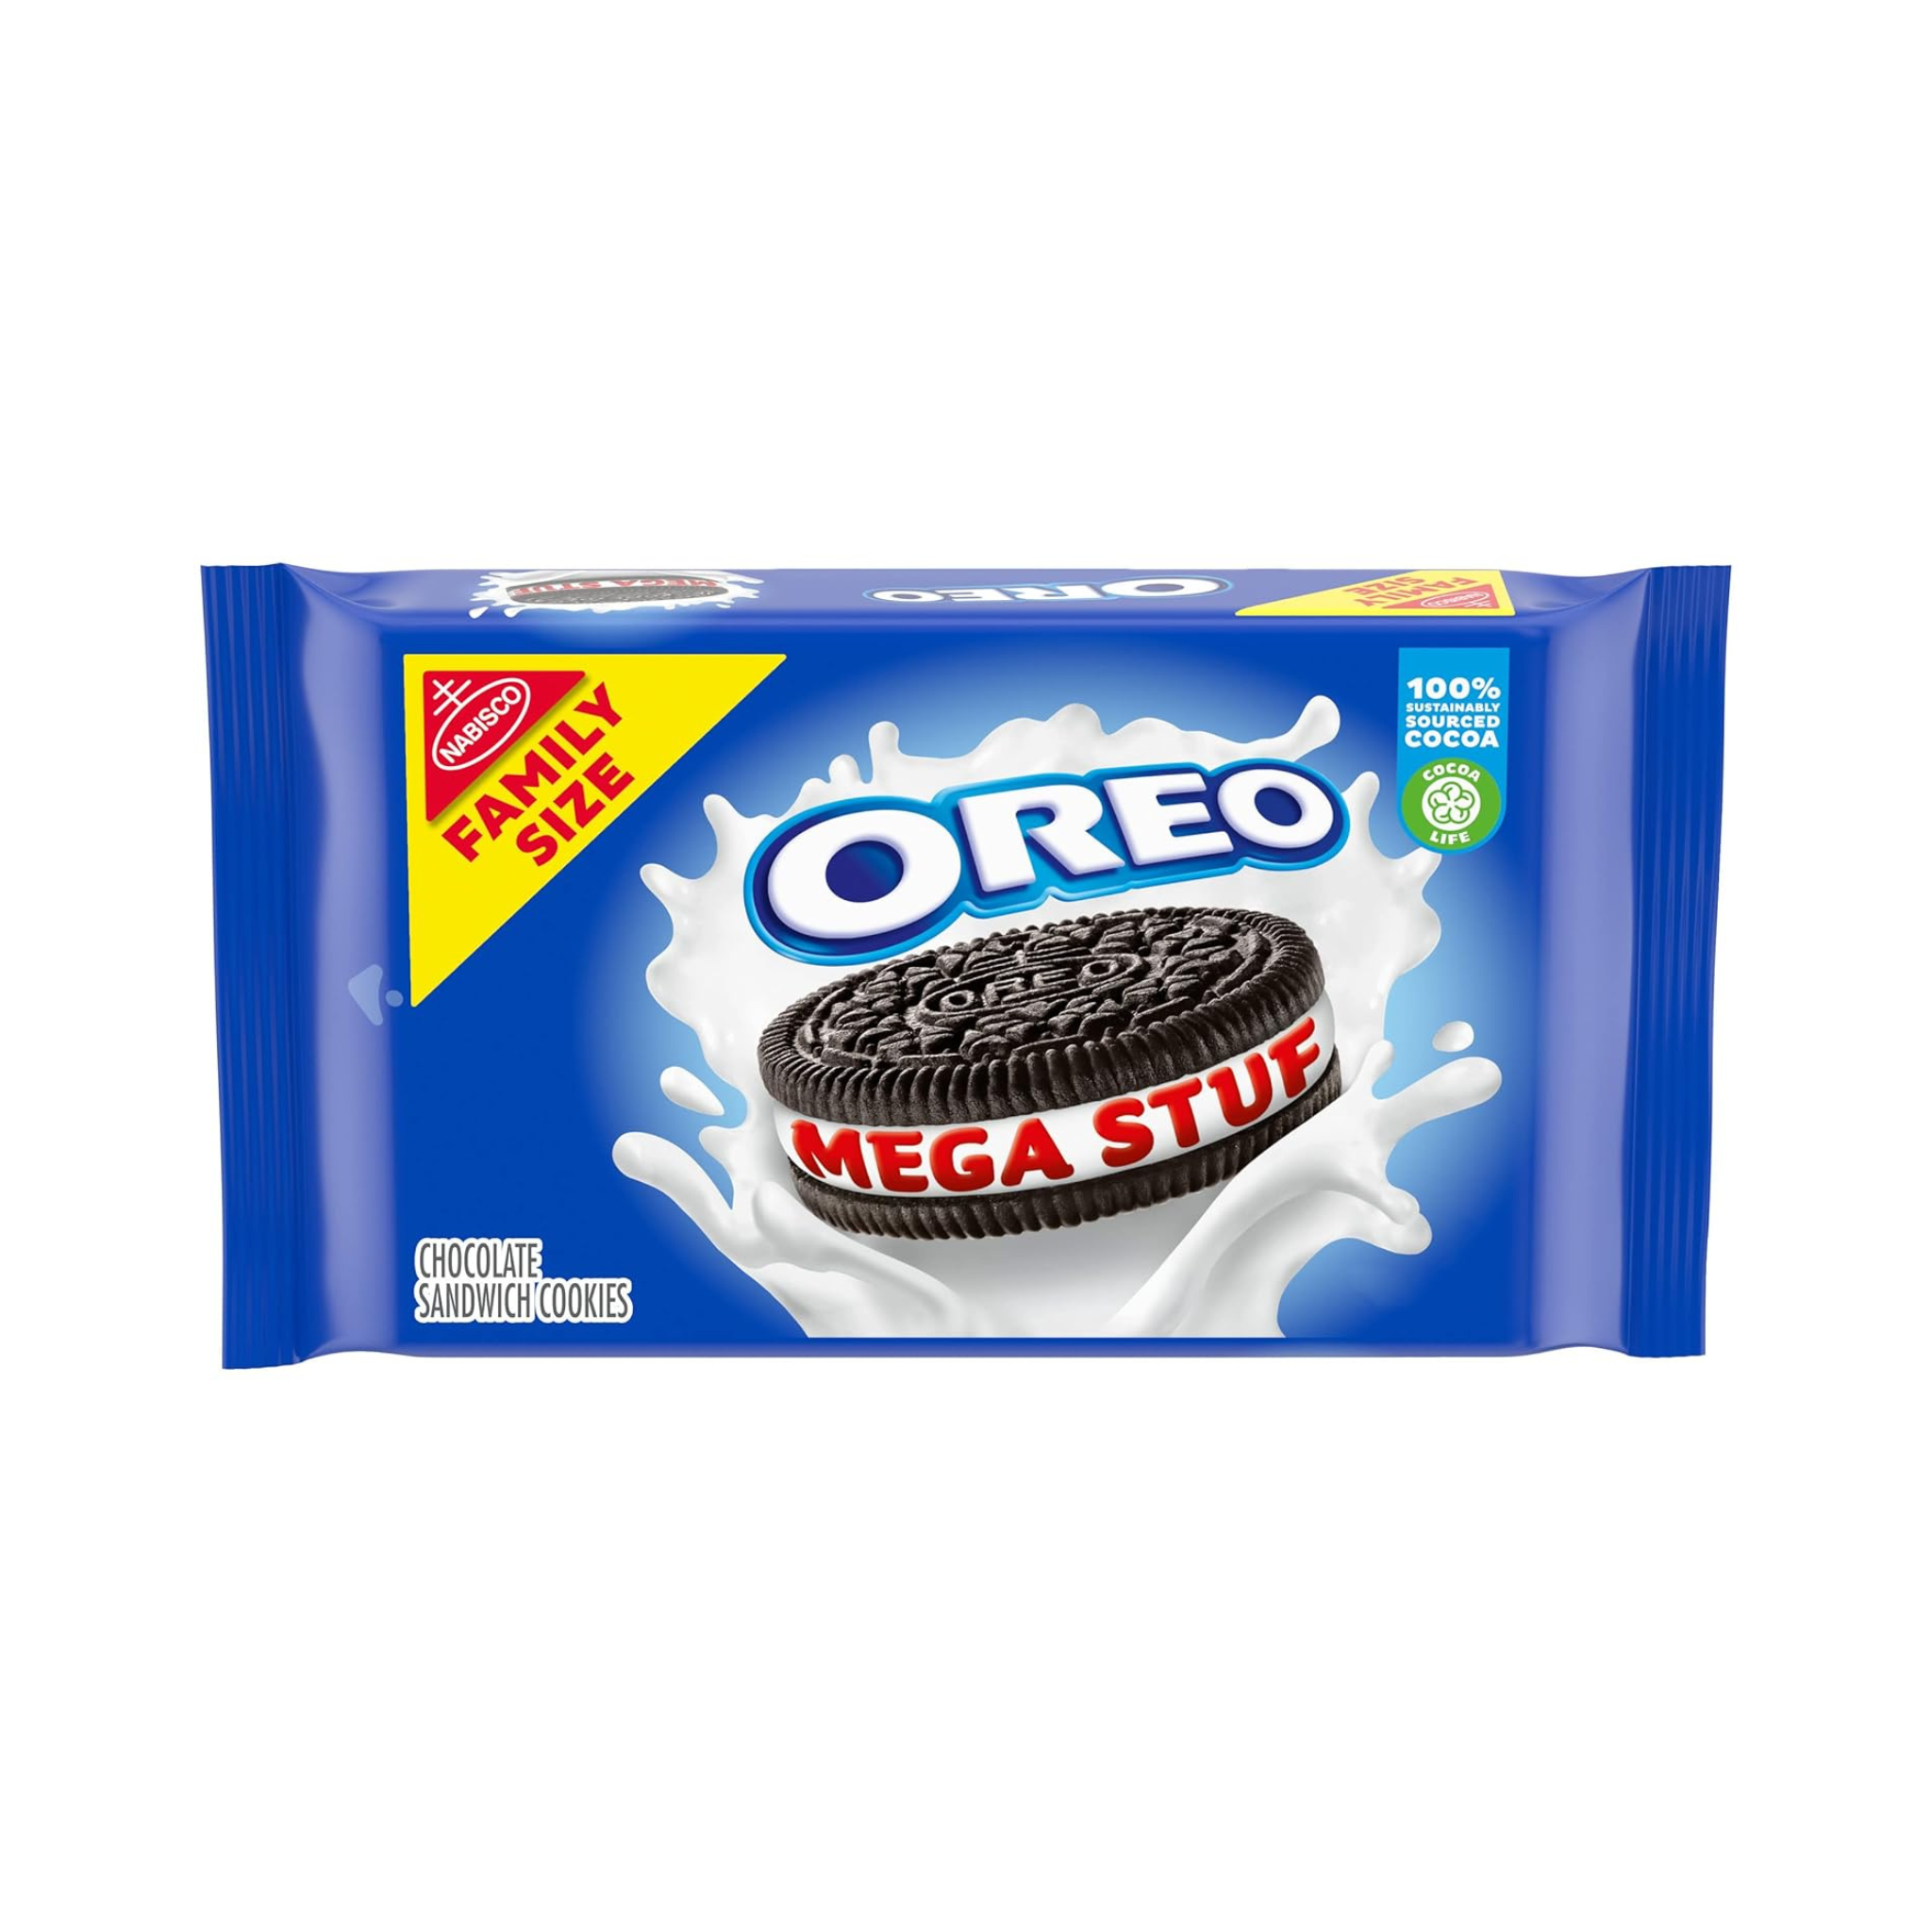 Family Sized Pack of OREO Mega Stuf or OREO Thins Chocolate Sandwich Cookies